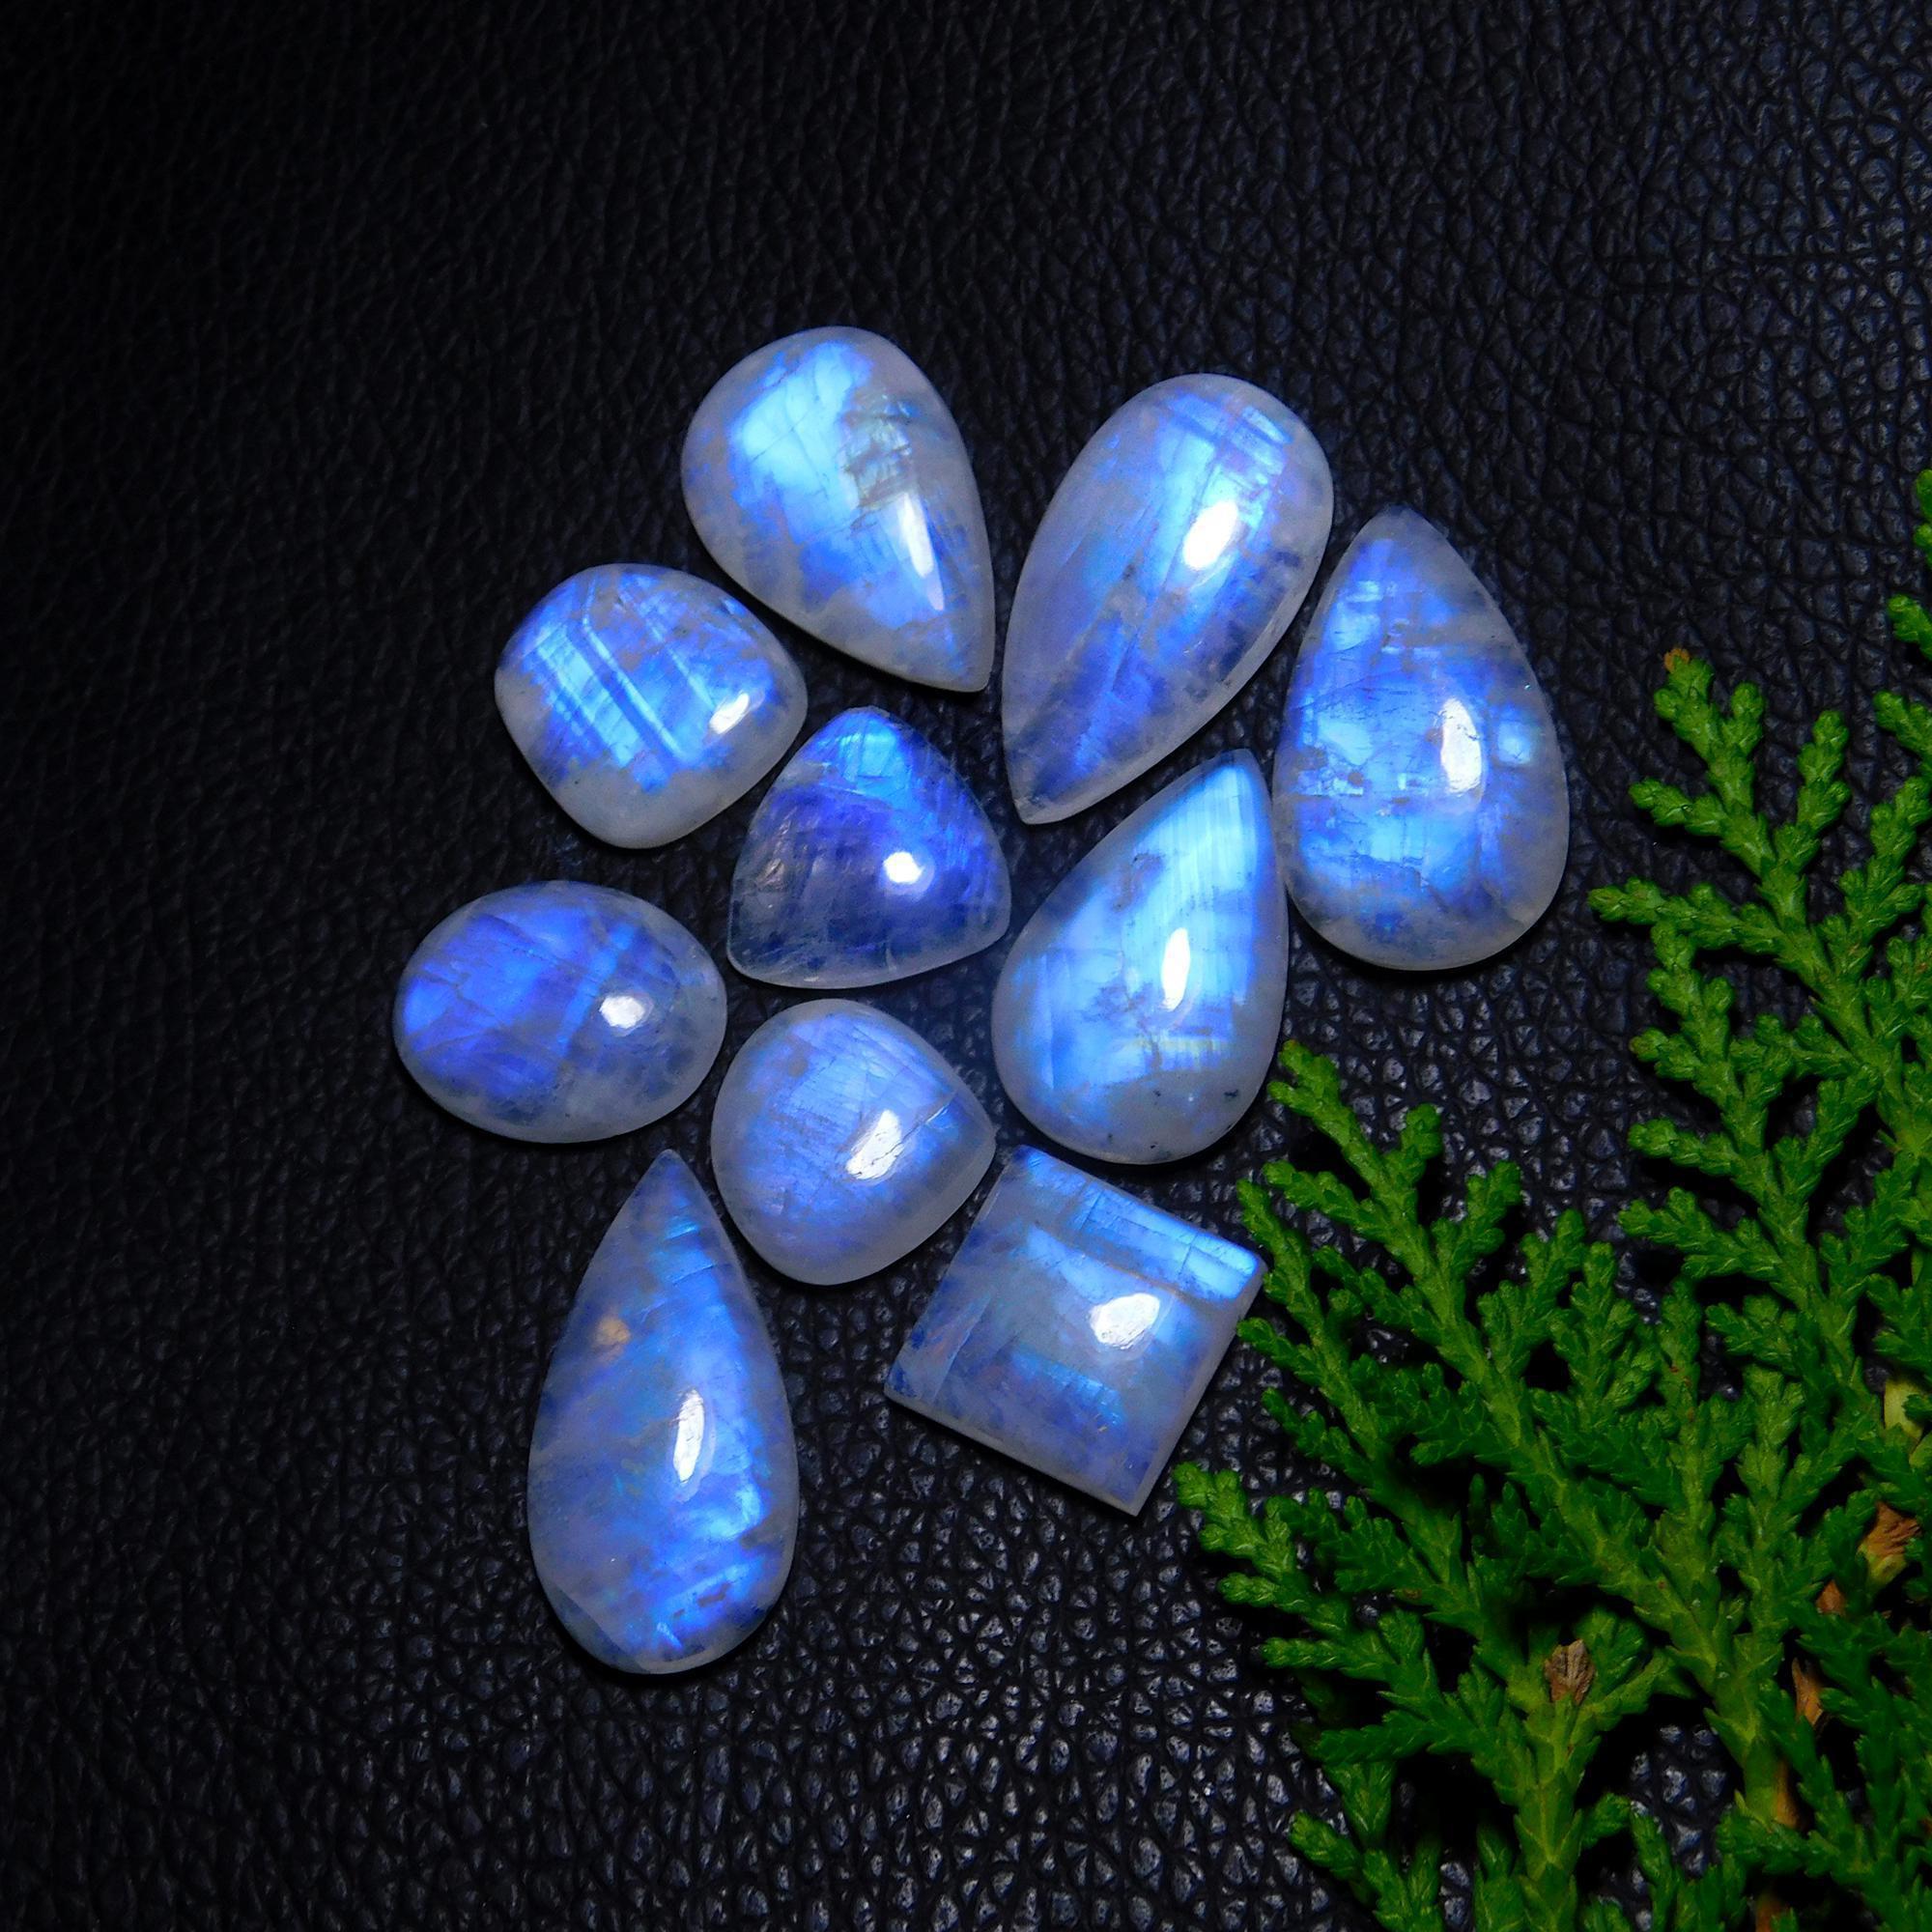 10Pcs 143Cts Natural Rainbow Moonstone Cabochon Blue Fire Loose Gemstone Crystal jewelry supplies wholesale lot gift for her Black Friday 27X13 15X15mm#9422